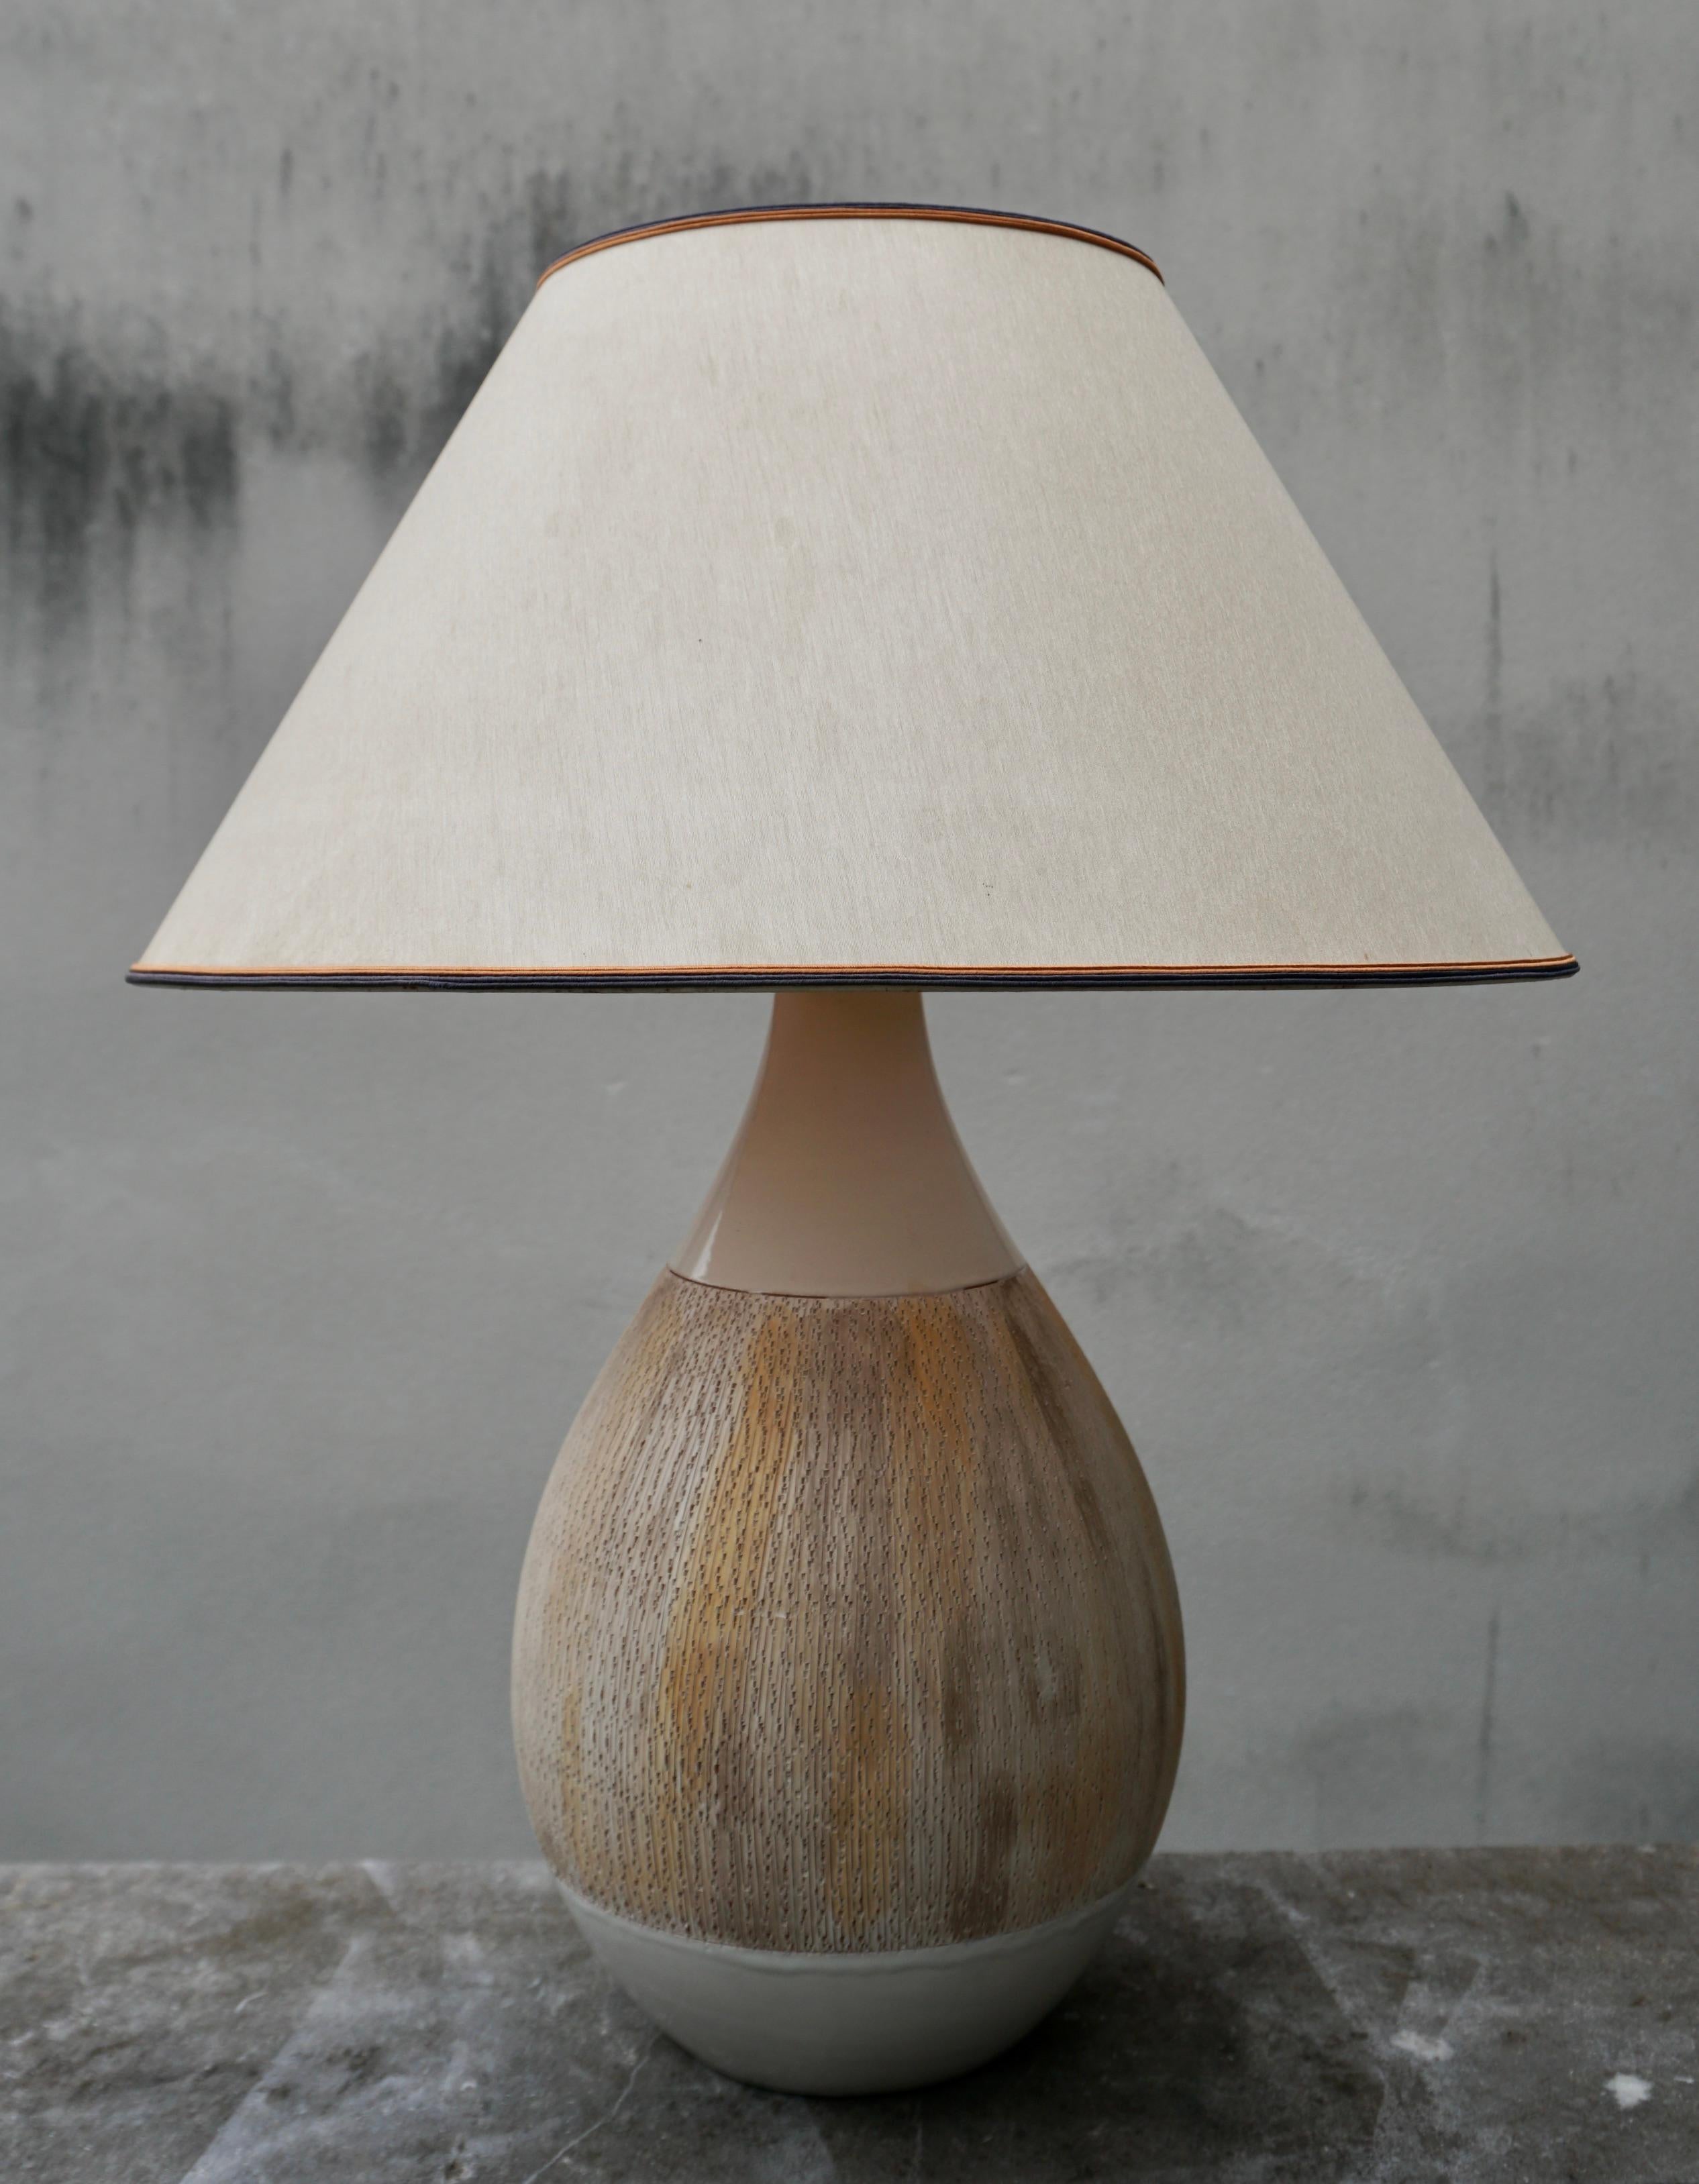 Italian table lamp in white glossy ceramic with textured ceramic.
Shade not included 
Condition: Excellent, minor surface wear.

Height base 17.3